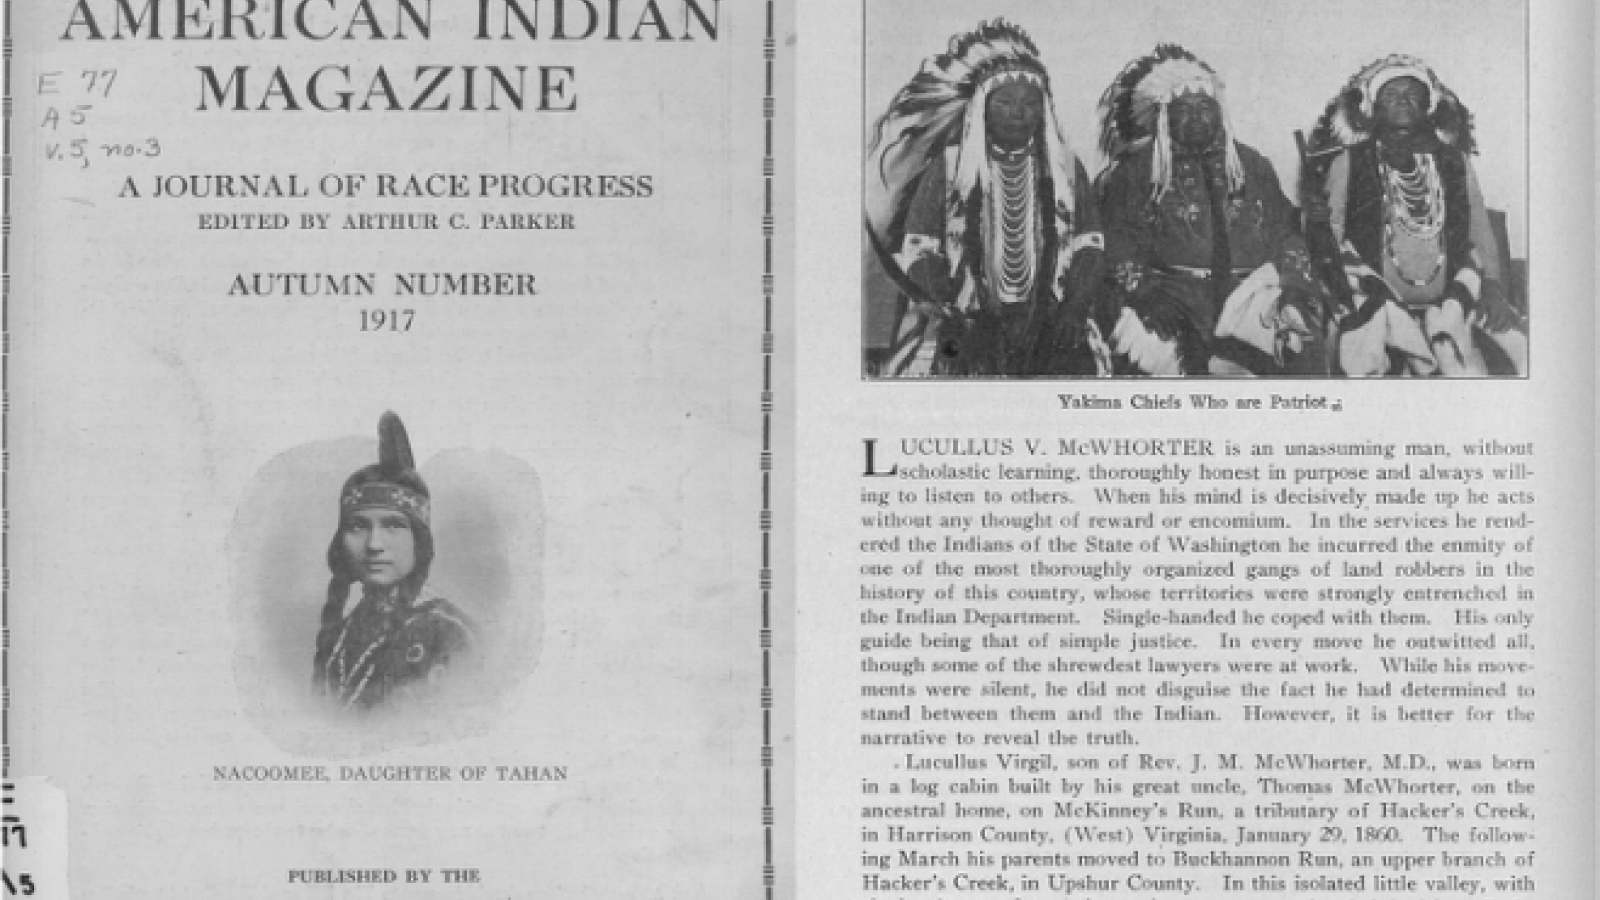 Quarterly Journal of the Society of American Indians, Image 12